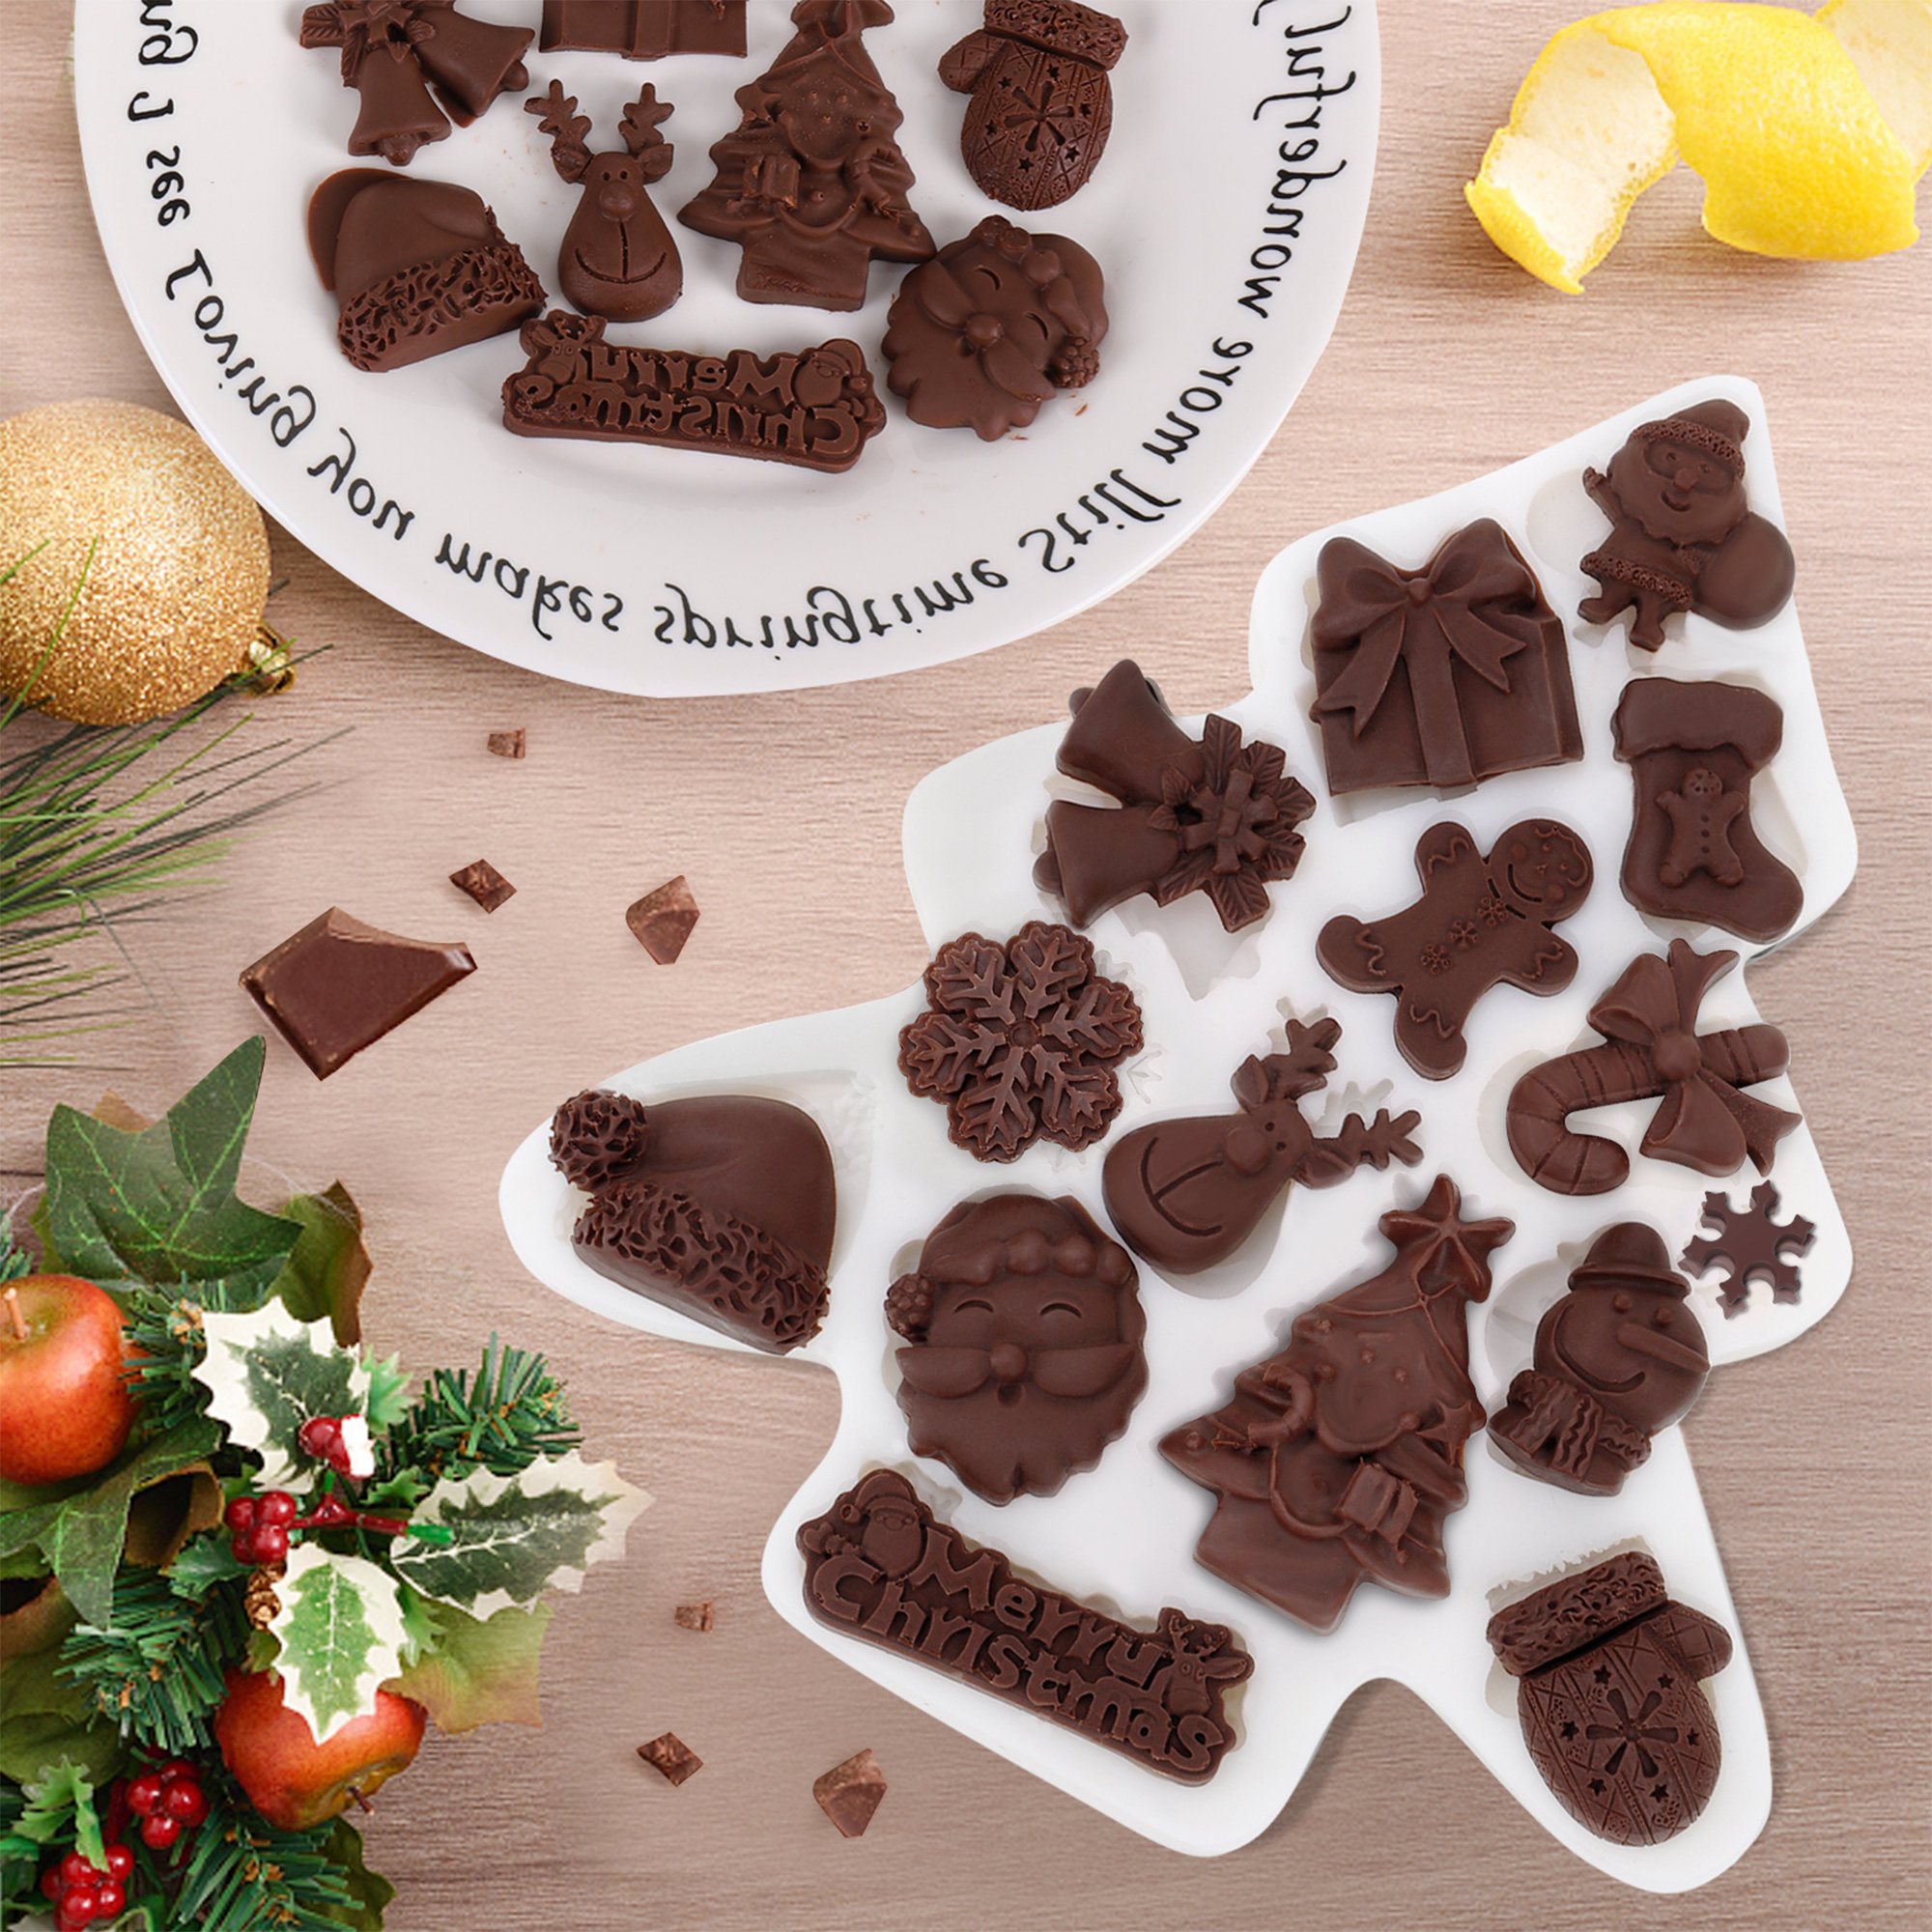 Kitchtic Silicone Non-stick Molds for Chocolate, Candy, Cookie and Mini  Cake - 6 Piece